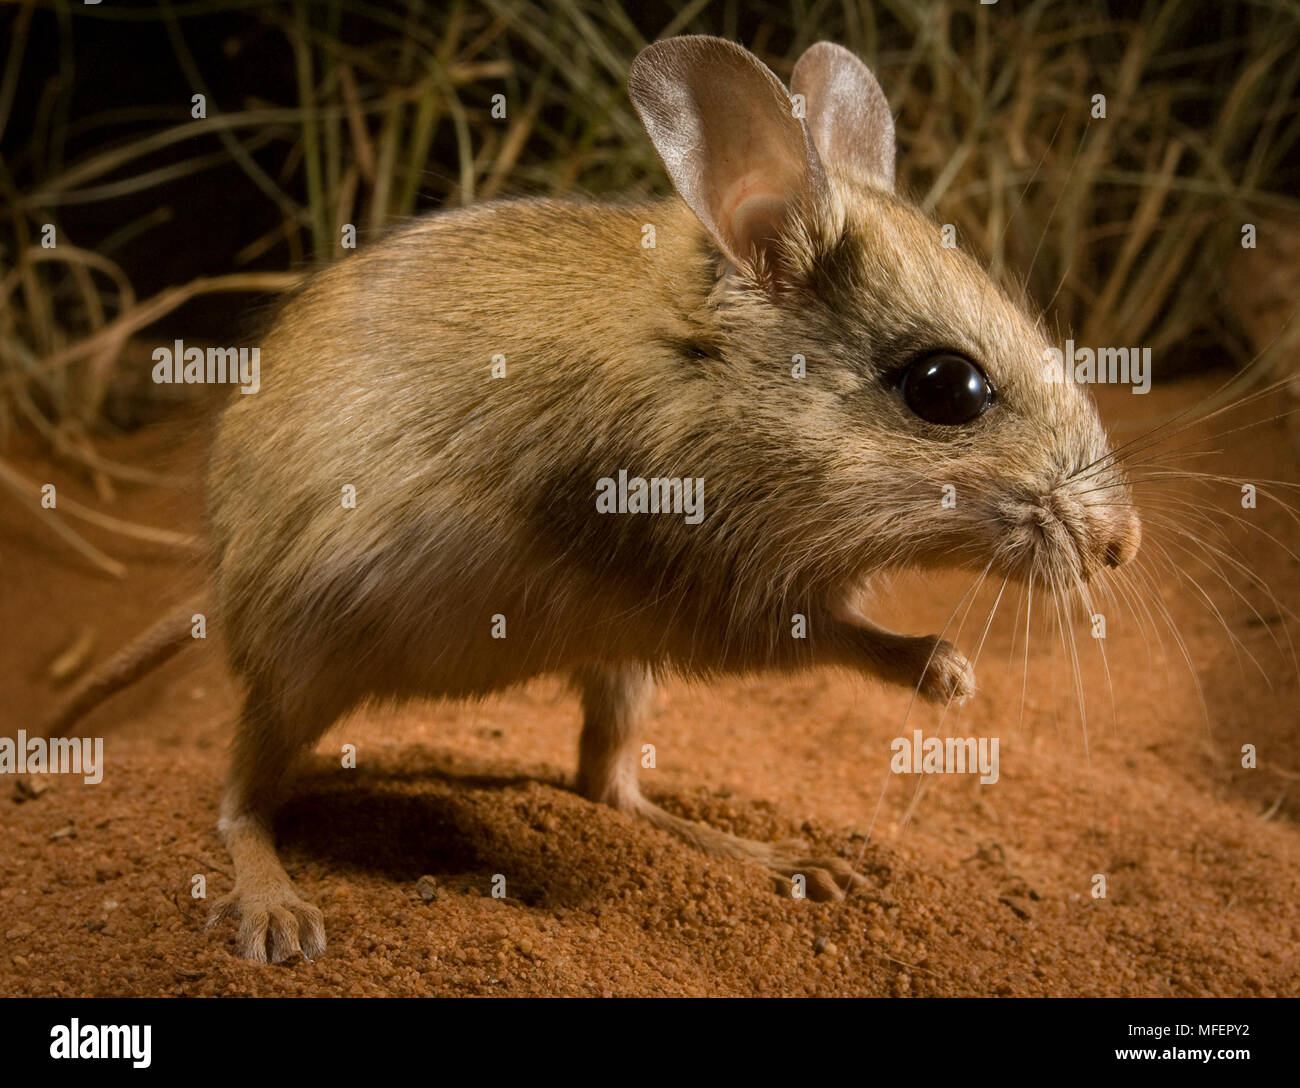 Spinifex Hopping Mouse (Notomys alexis), Fam. Muridae, Rodentia, One of the most desert adapted mammals with a record rate of urine concentration, Ani Stock Photo